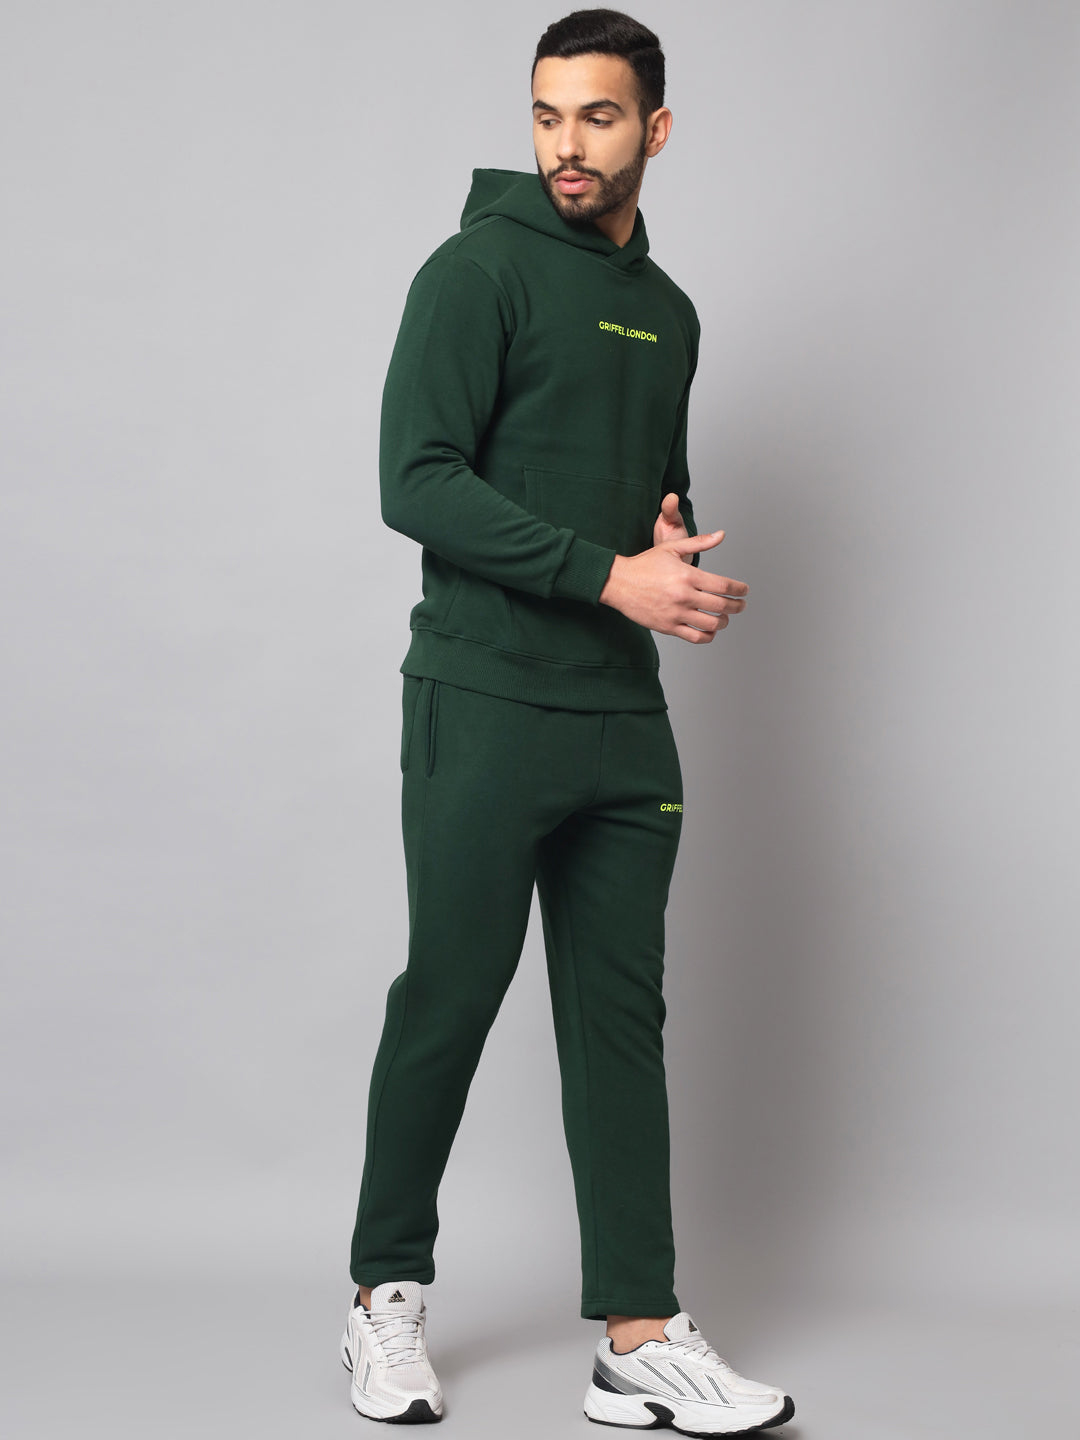 Griffel Men's Front Logo Solid Fleece Basic Hoodie and Joggers Full set Green Tracksuit - griffel